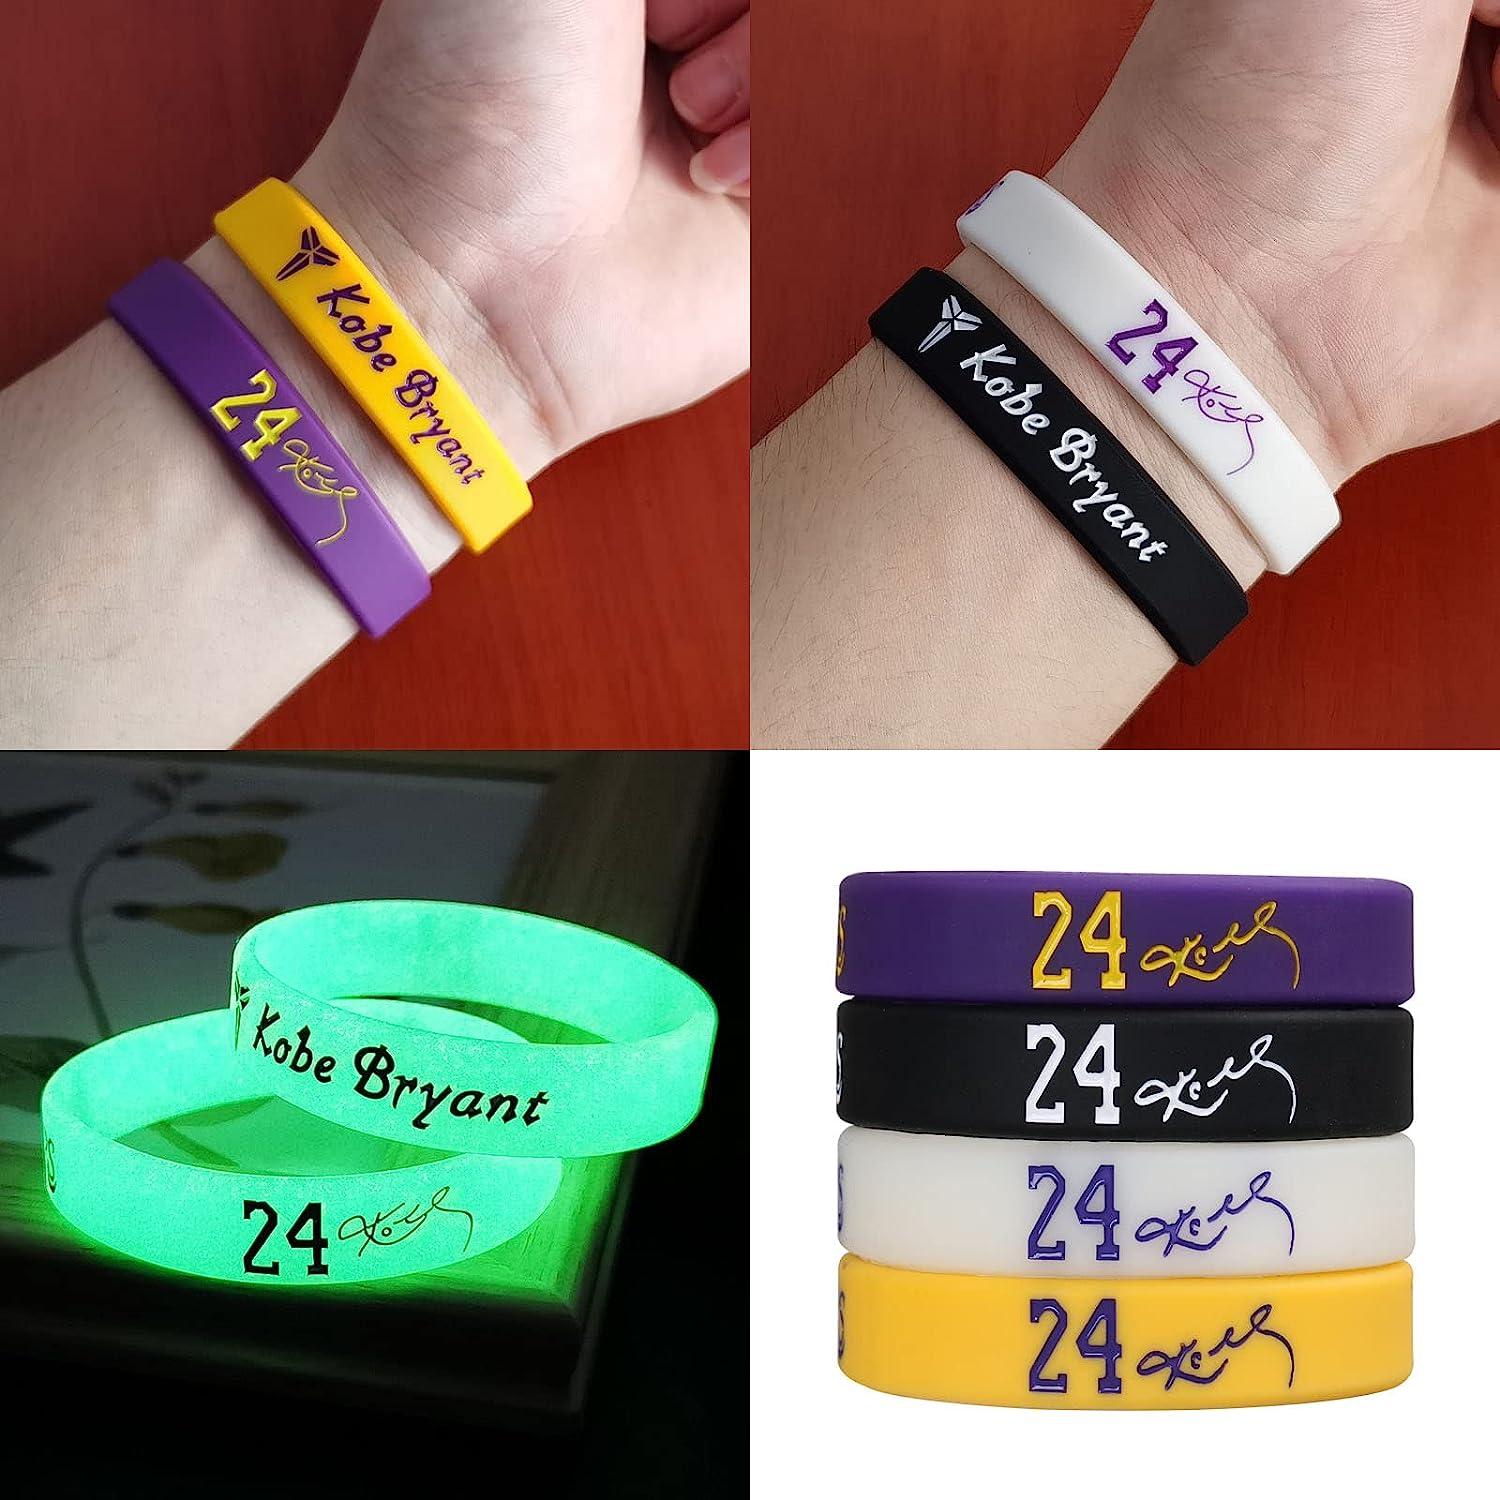 What Are Some Cool, Creative Ways To Preserve Old Wristbands